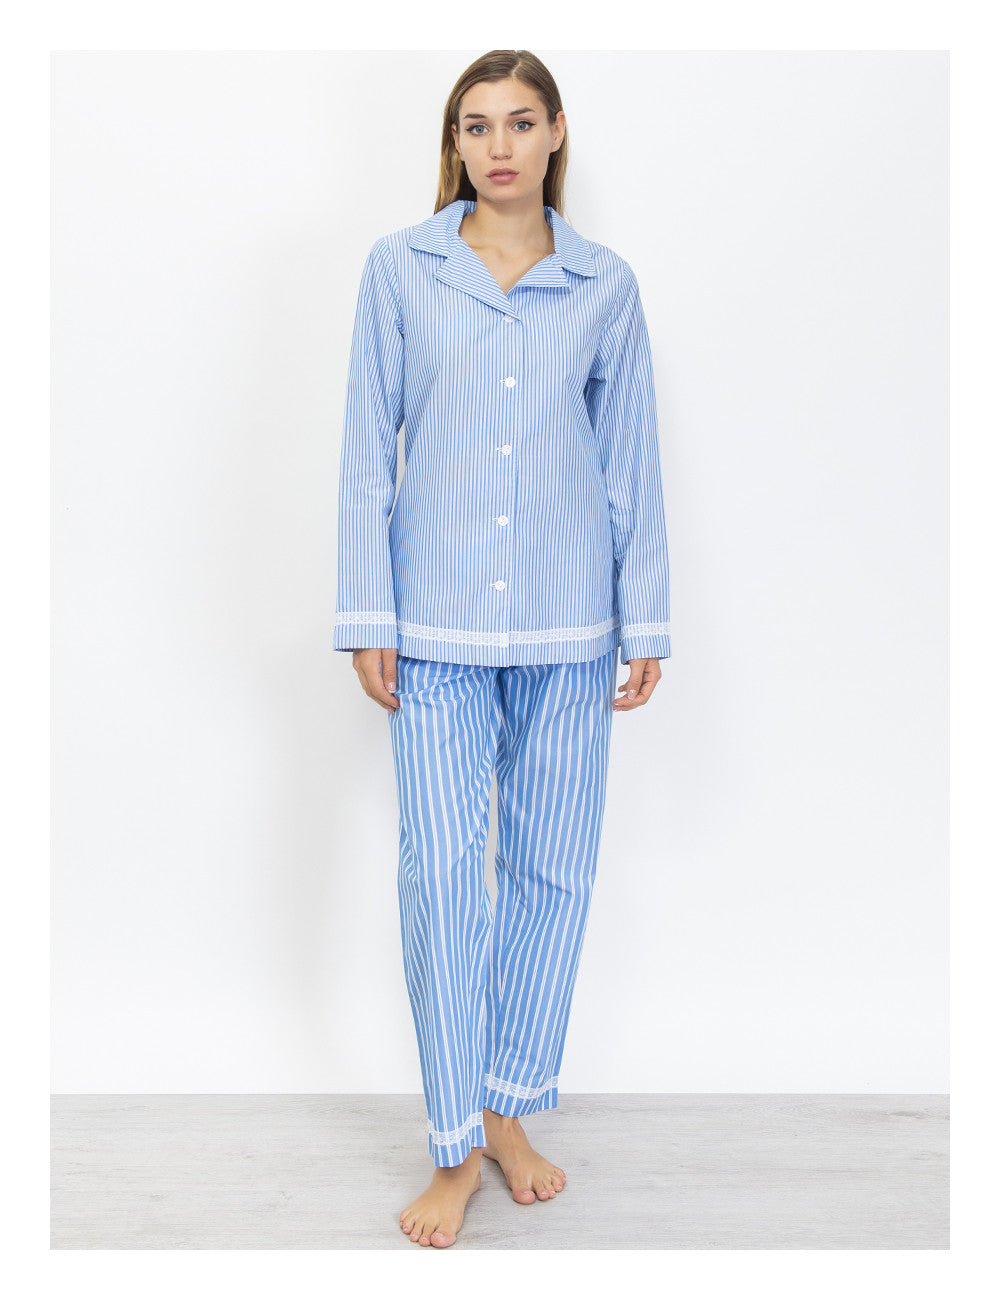 This Verdissima pajama set features a combination of male and female styling, with a button-up shirt top and long pants.